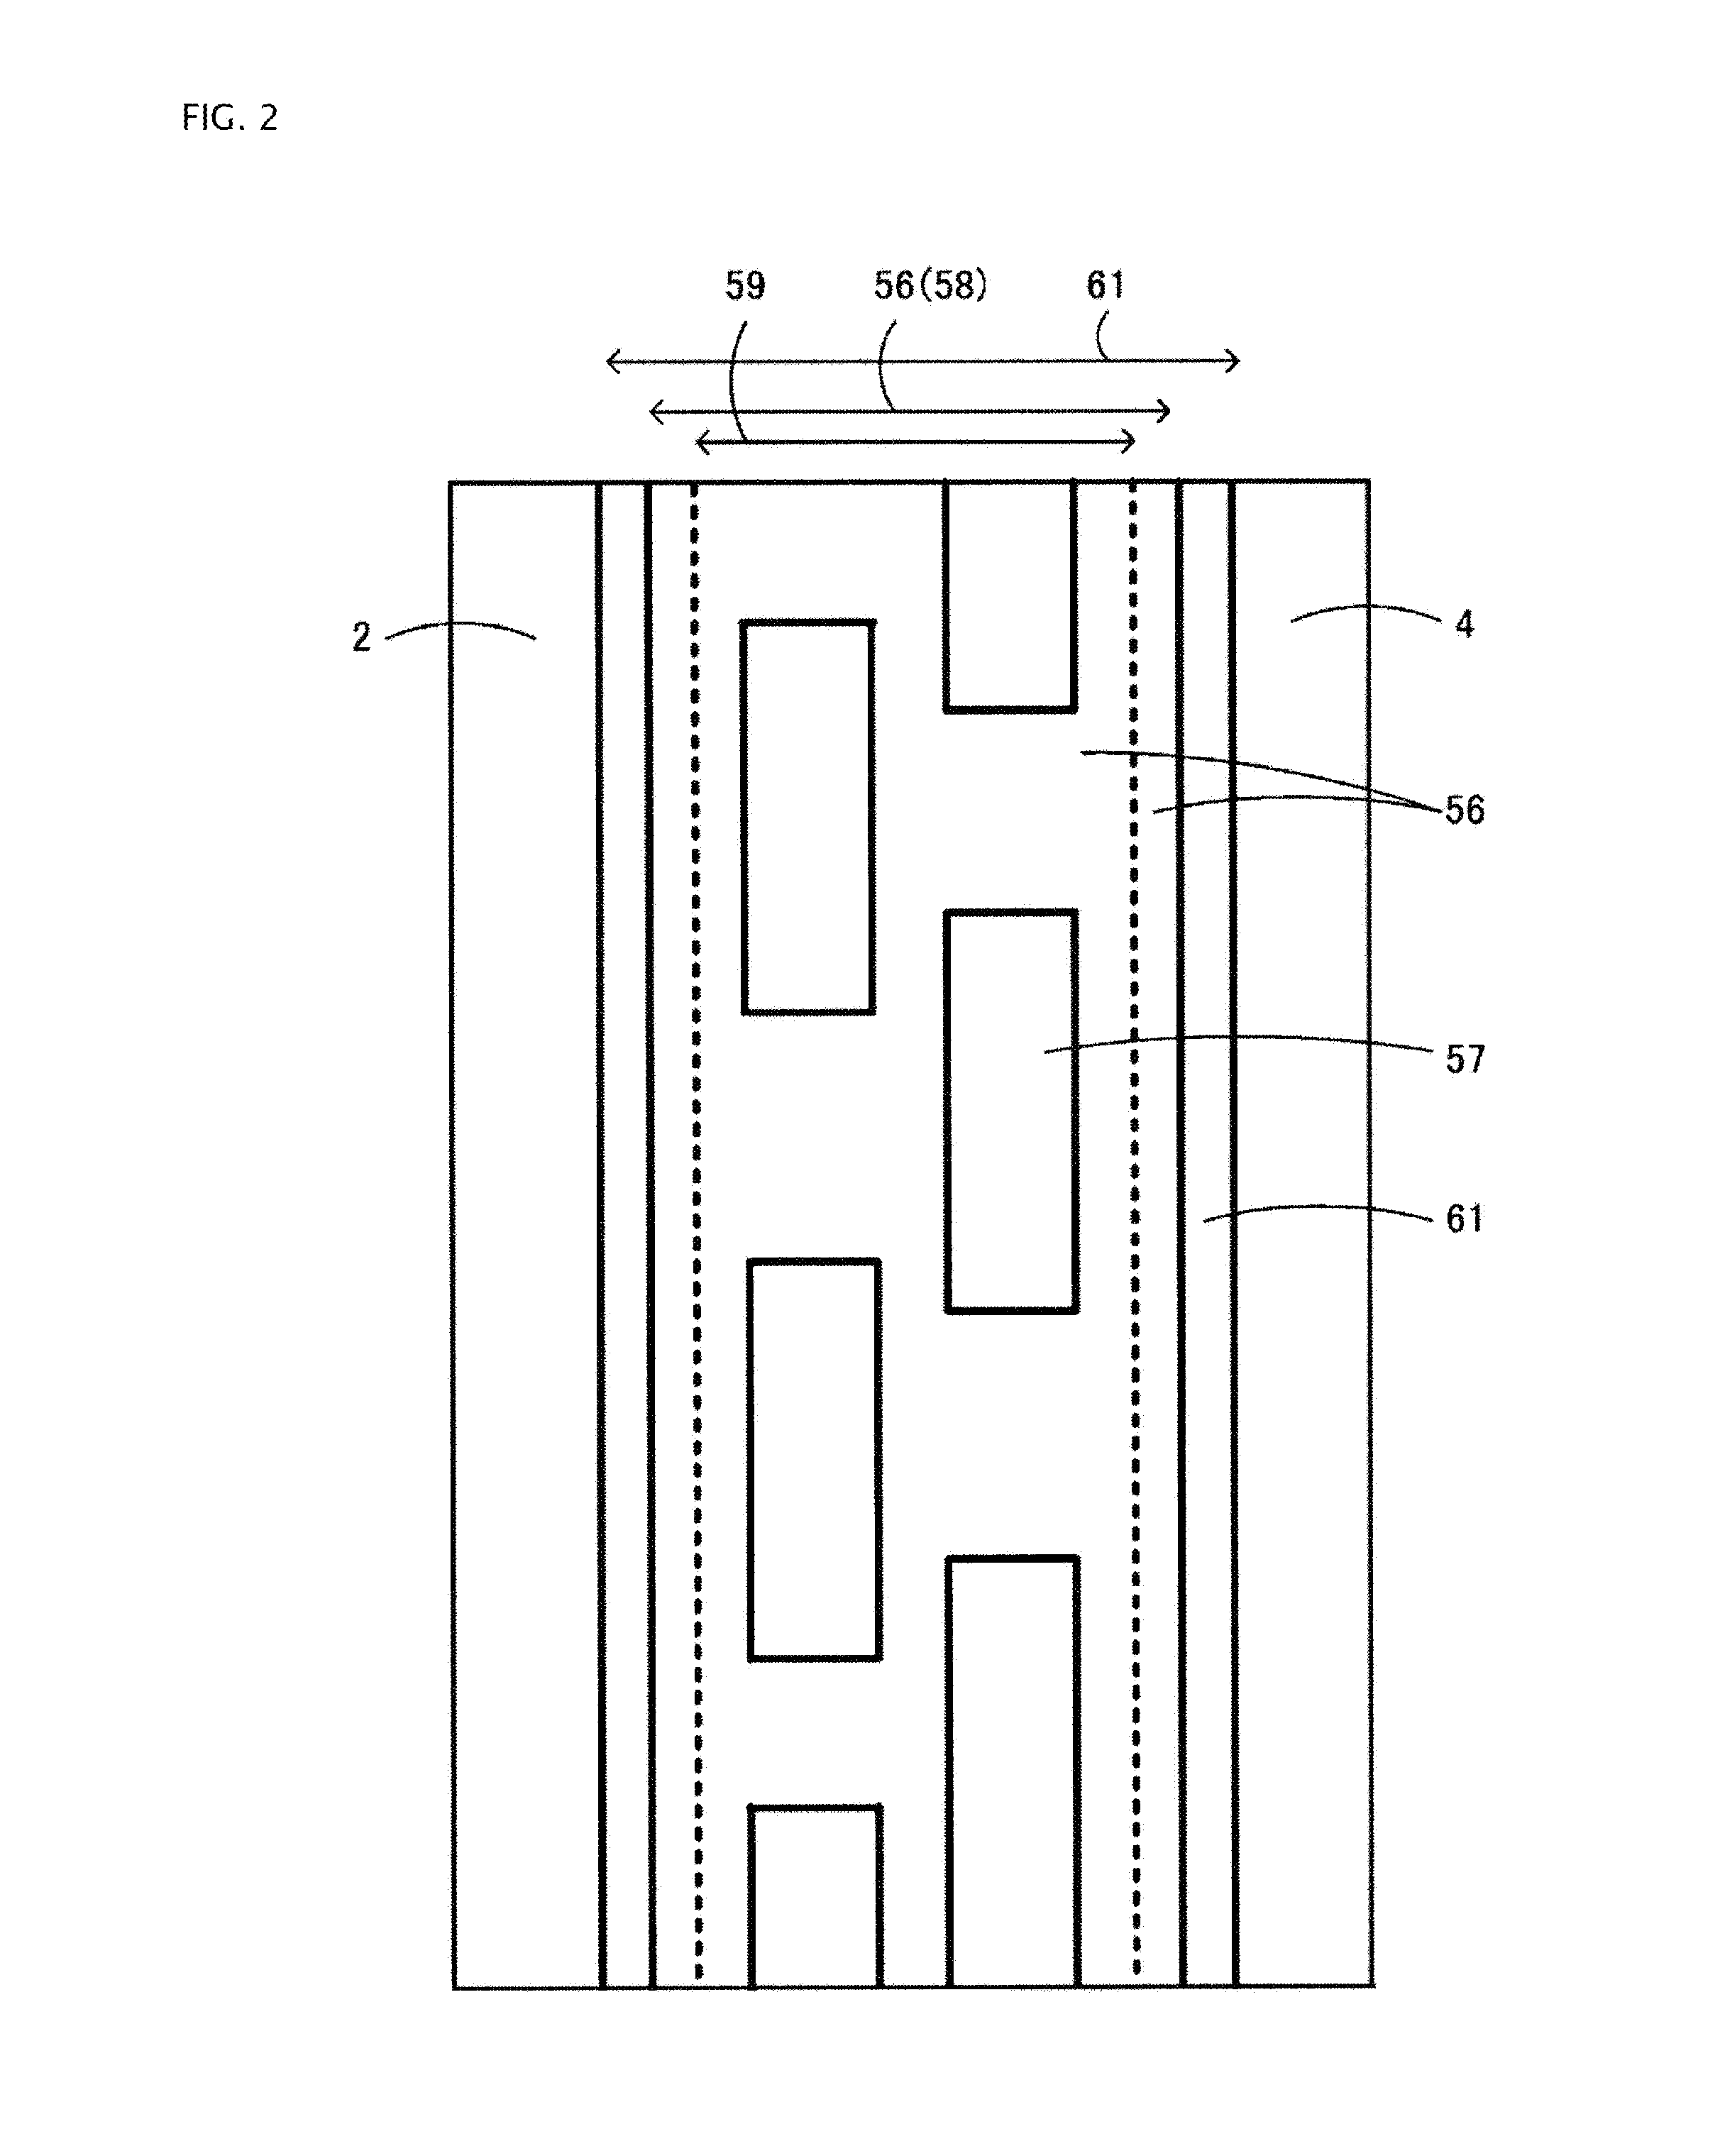 High-voltage integrated circuit device